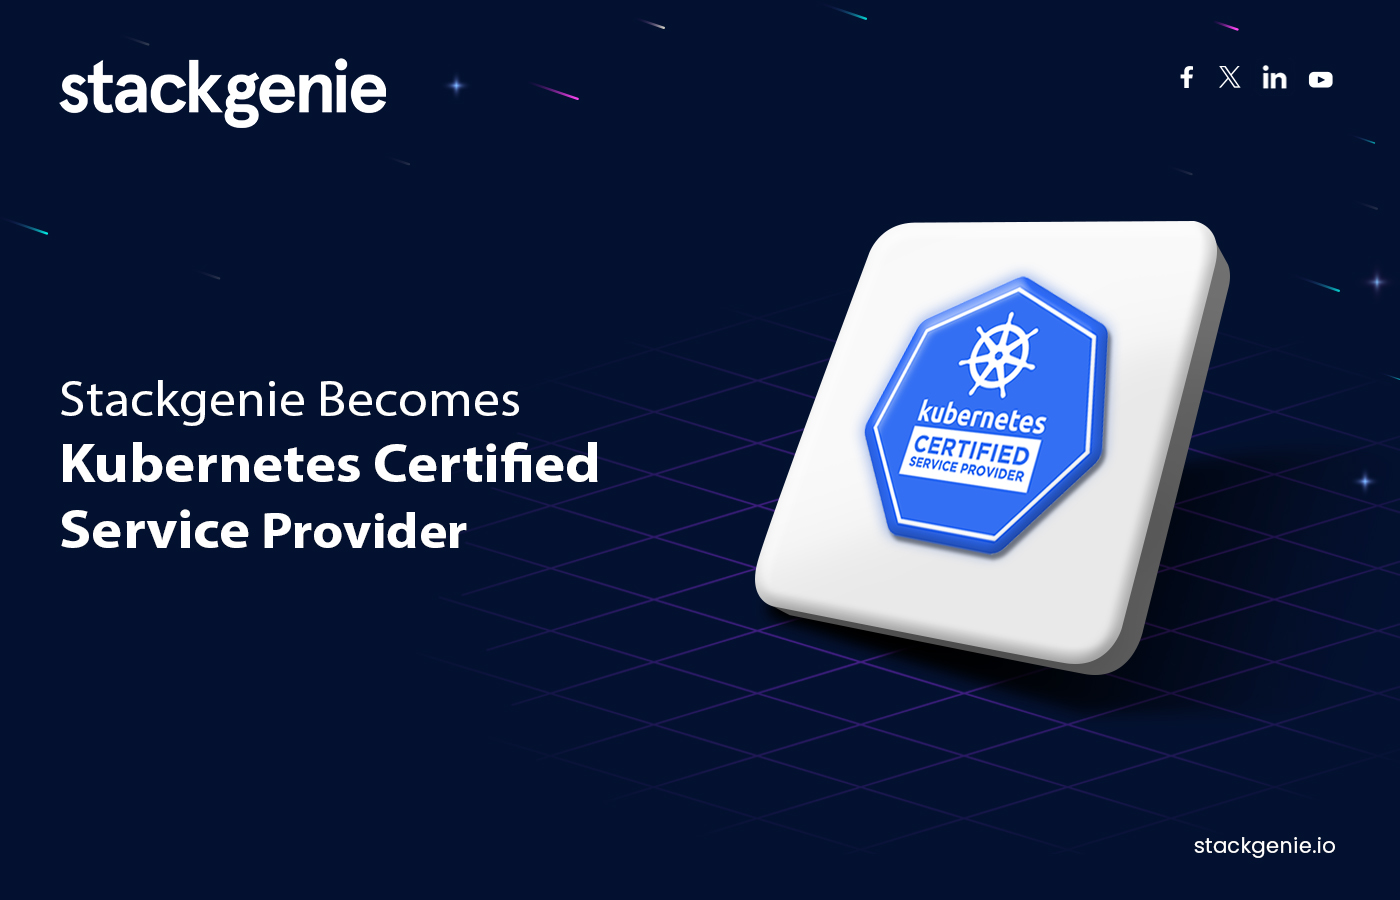 Stackgenie becomes Kubernetes Certified Service Provider